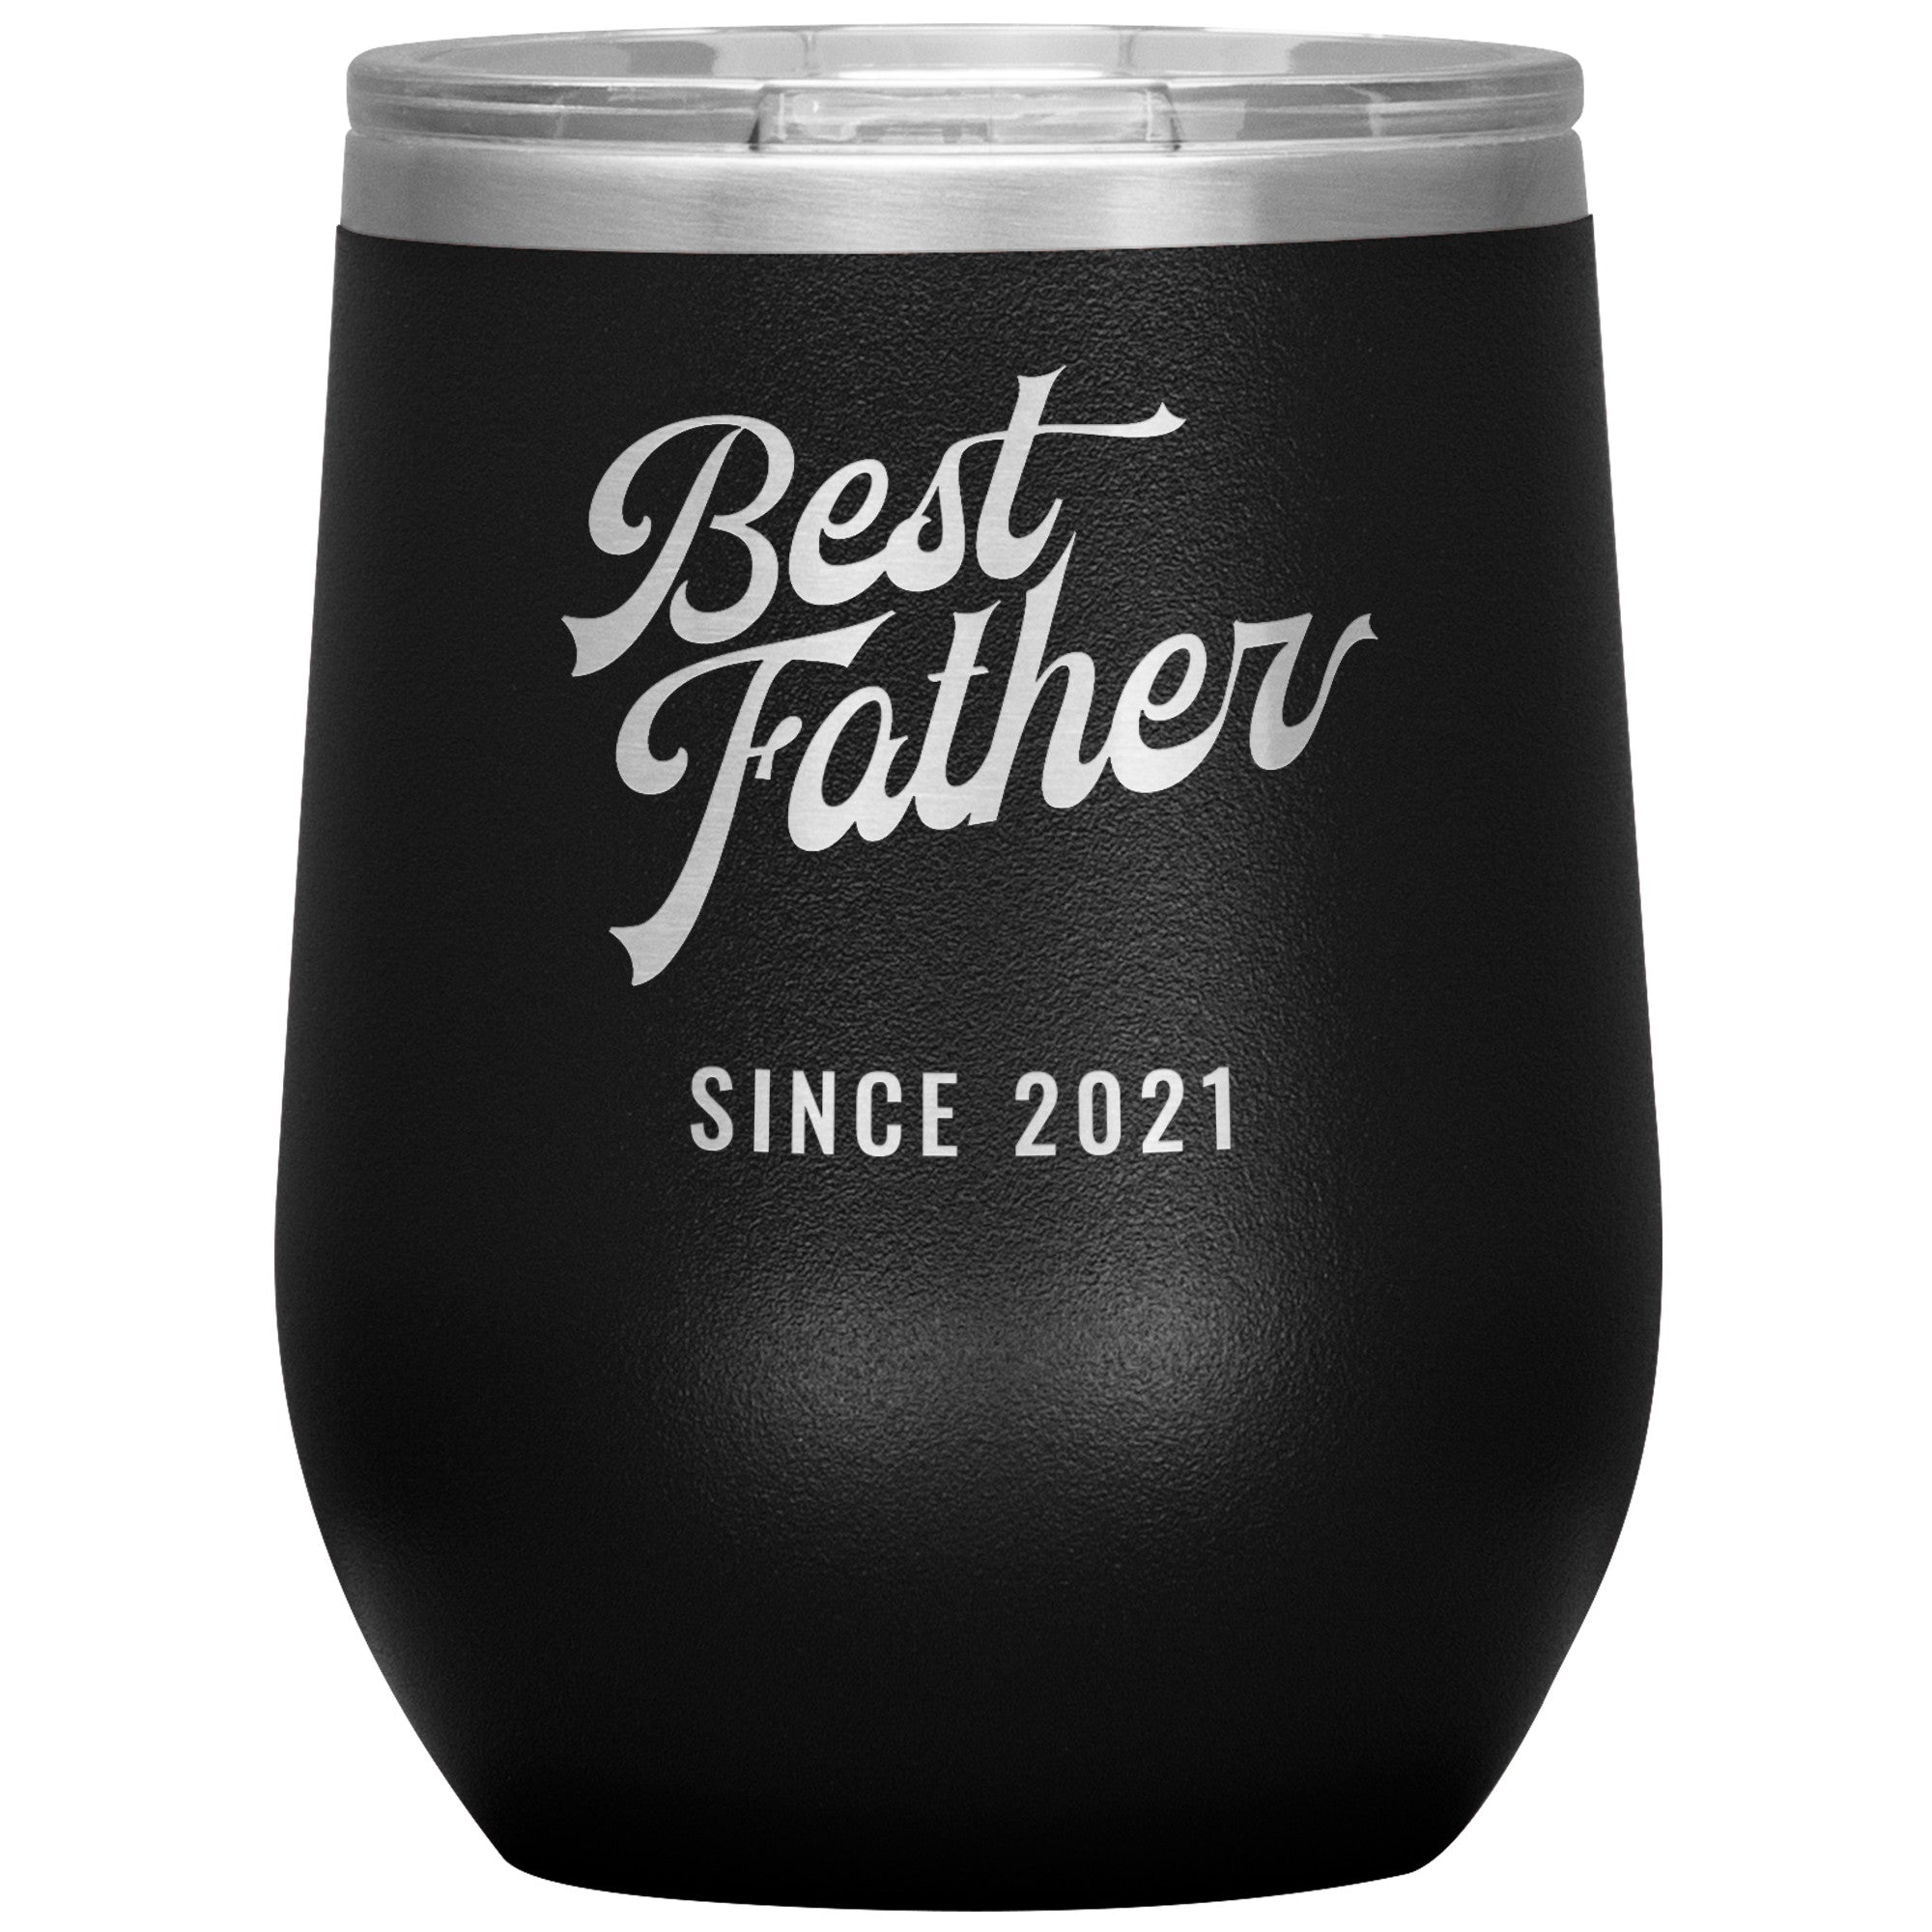 Best Father Since 2021 - 12oz Insulated Wine Tumbler